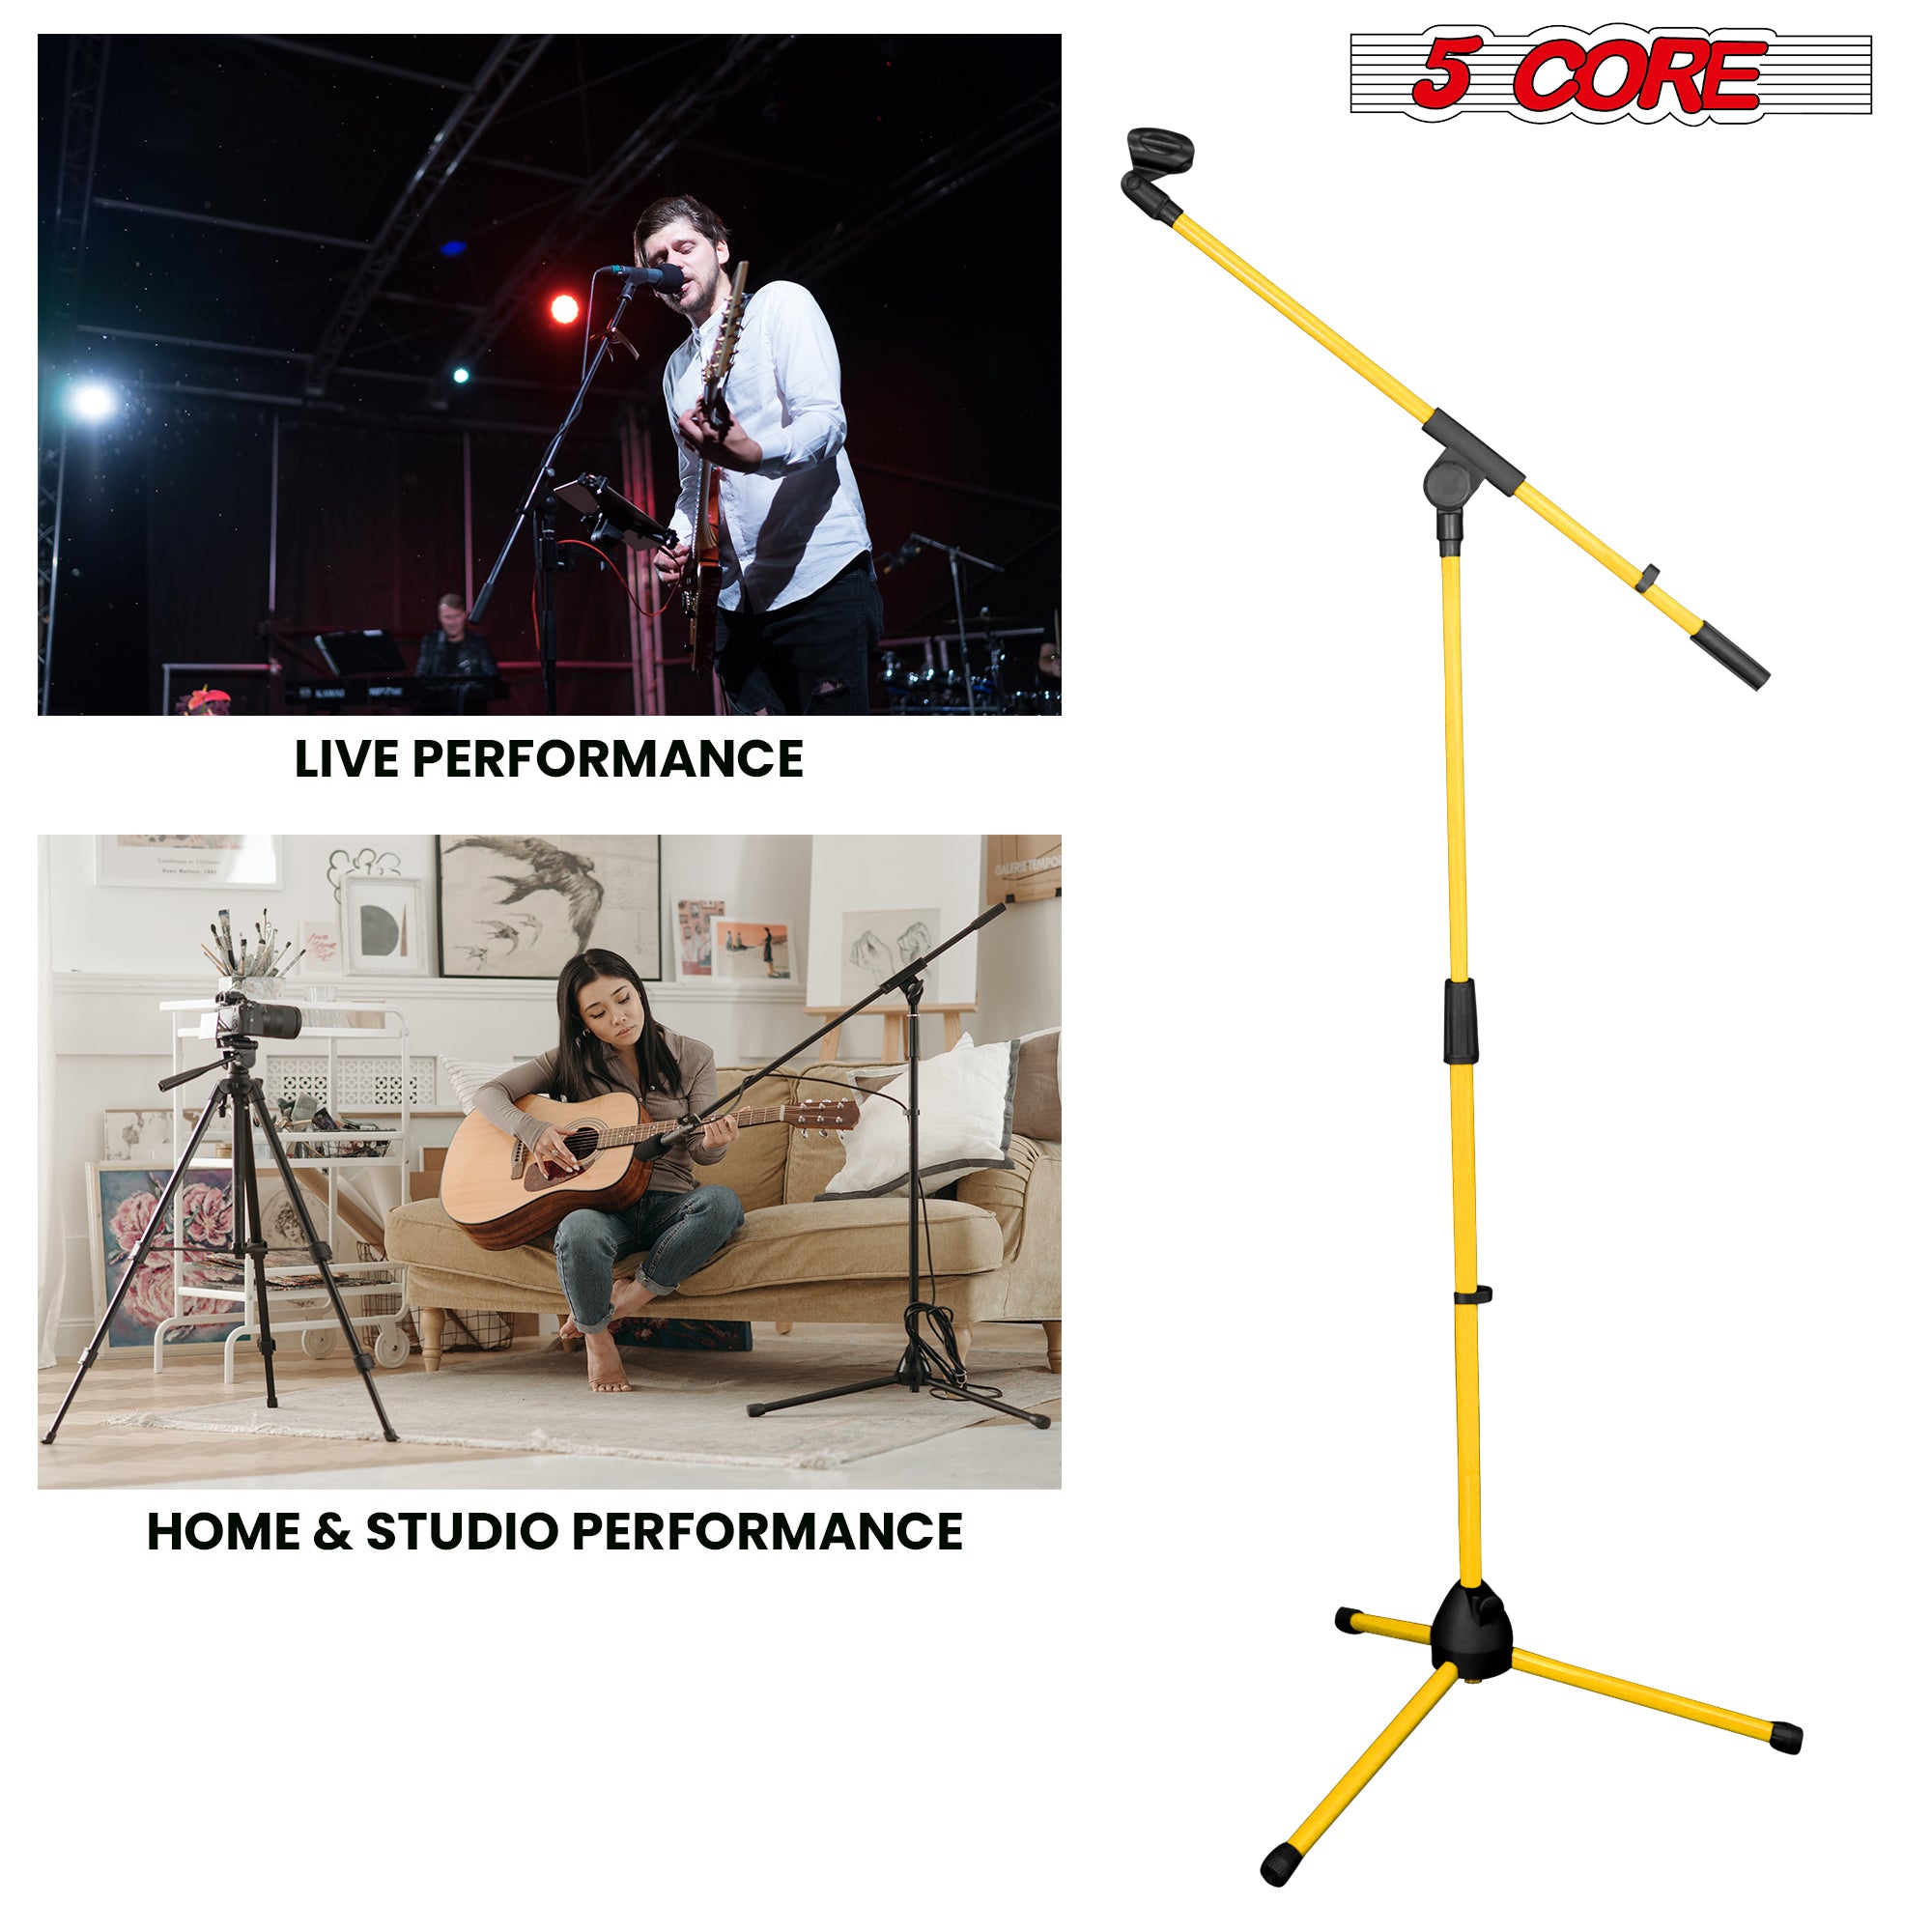 5 Core Mic Stand Yellow 1 Piece Collapsible Height Adjustable Up to 6ft Metal Microphone Tripod Stand w Boom Arm Para Microfono for Singing Karaoke Speech Stage Recording - MS 080 YLW